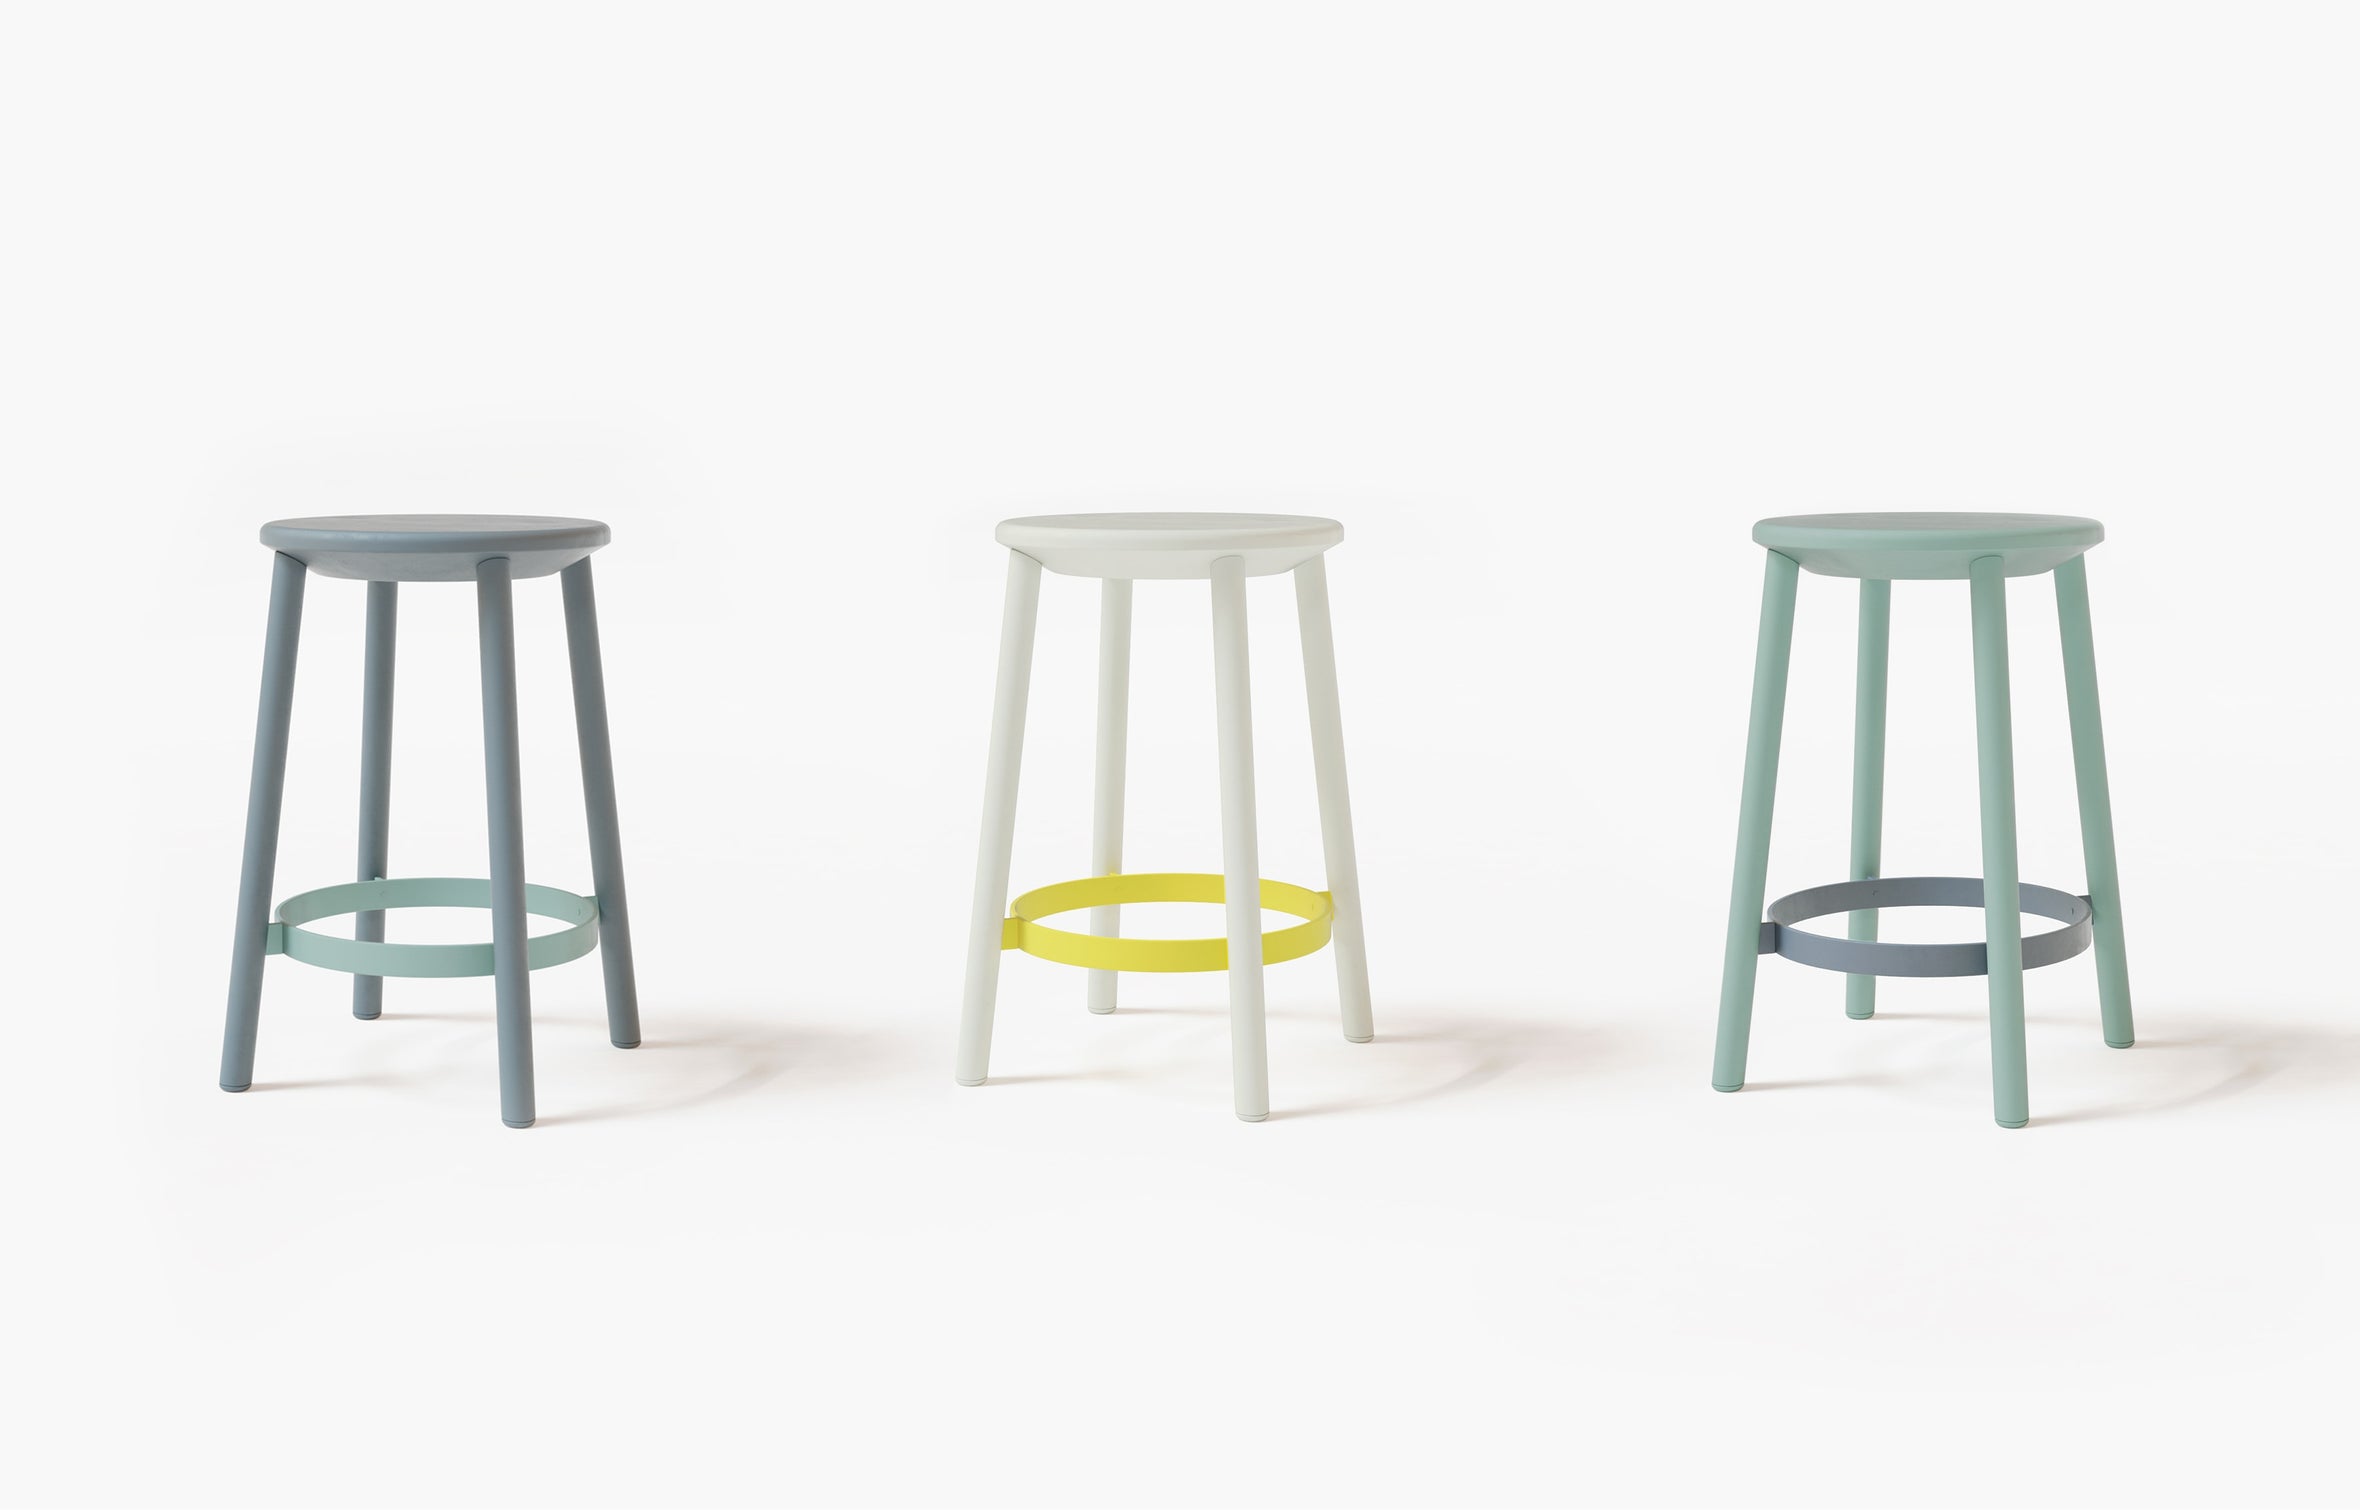 Kit counter stool | ff&e dorm furniture manufacturers | Roomy | Chicago